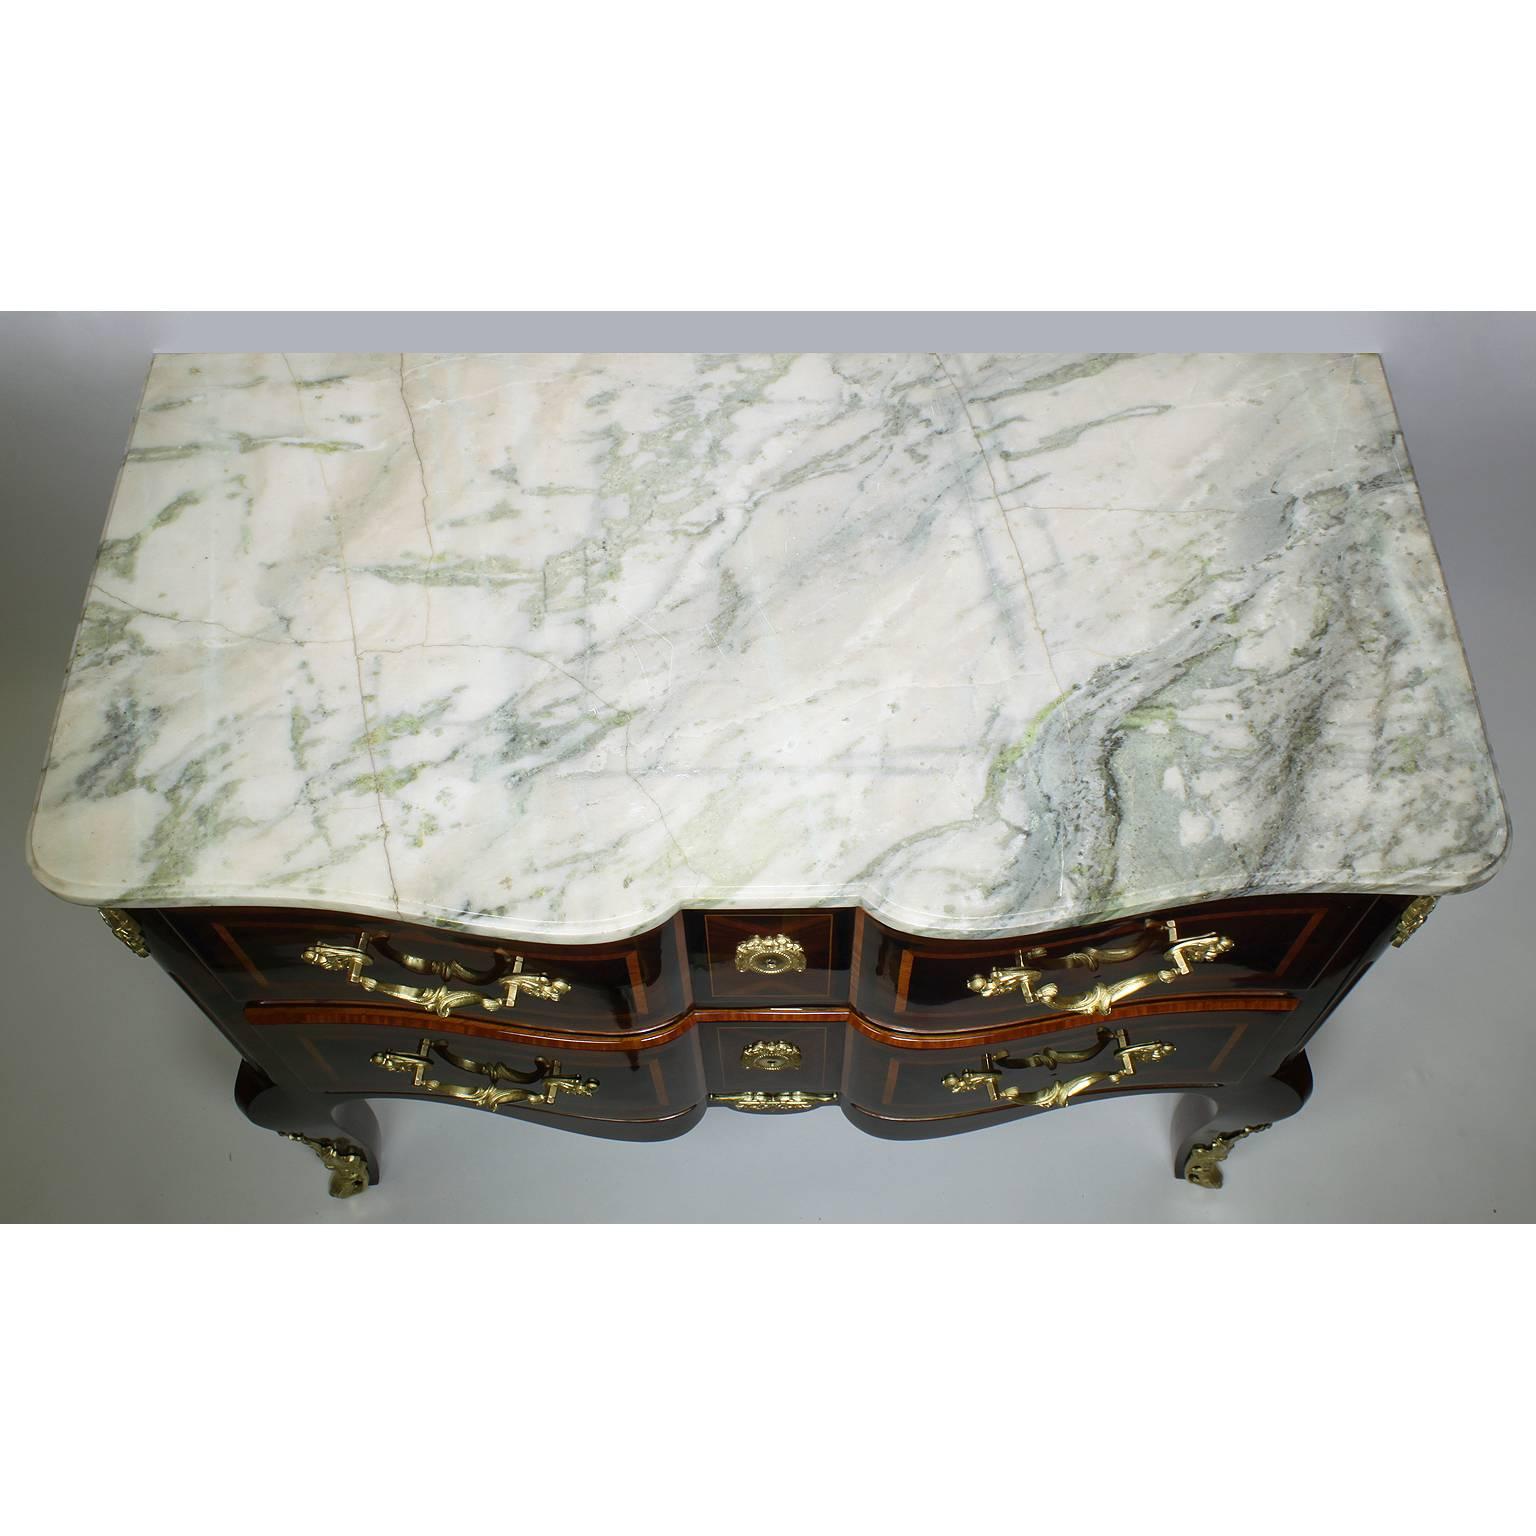 19th Century Regency Style Kingwood and Tulipwood and Ormolu Mounted Commode For Sale 4